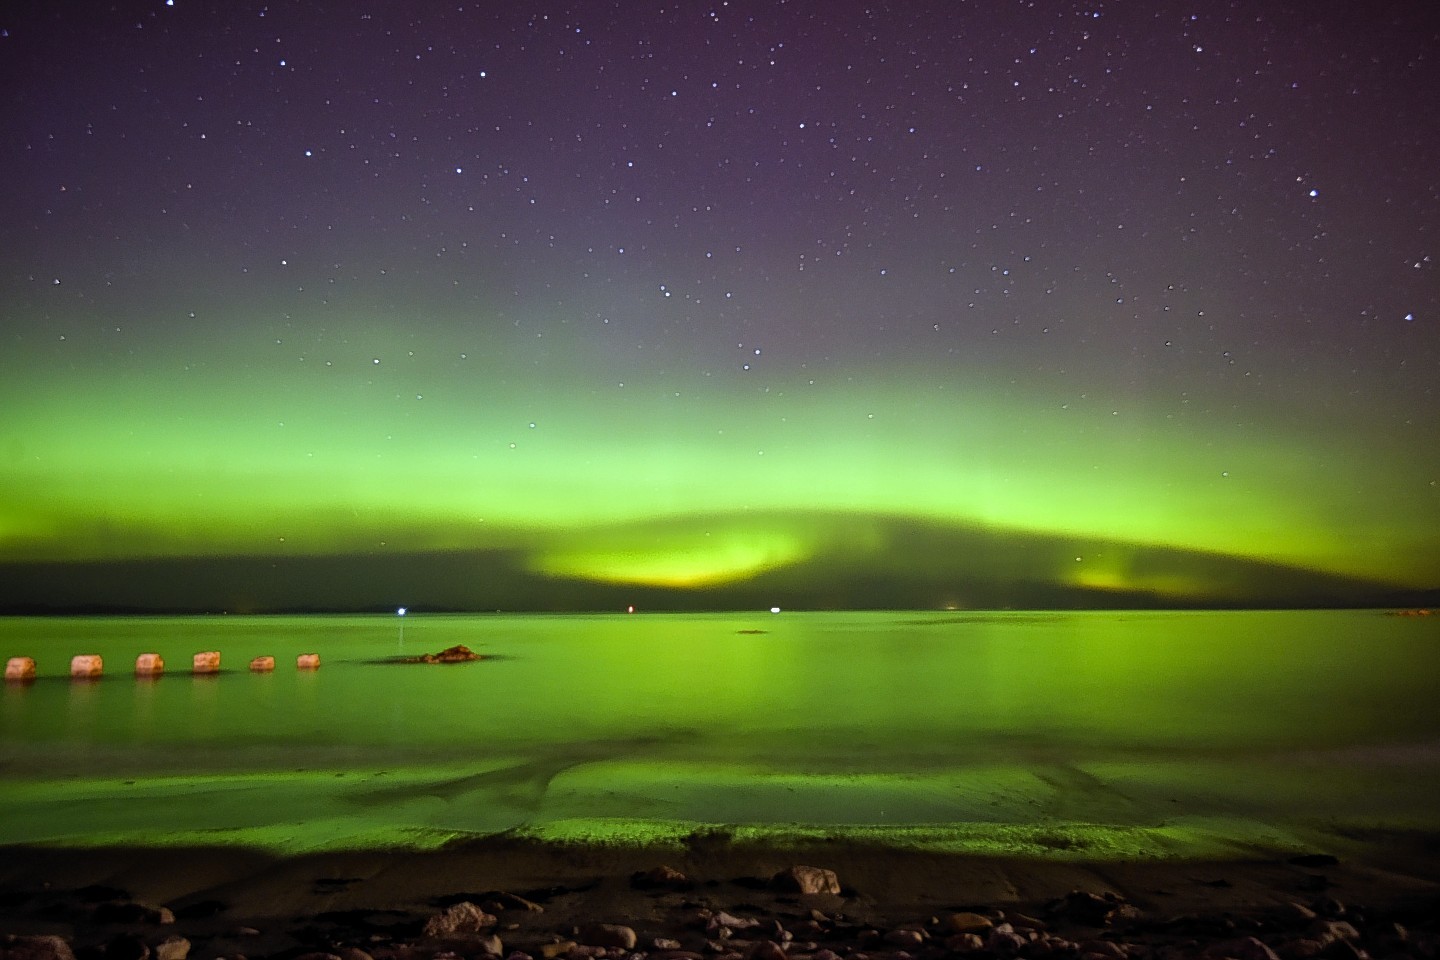 The Aurora Borealis, also known as the Northern Lights, are seen lighting up the sea by the West Beach in Lossiemouth, Moray 